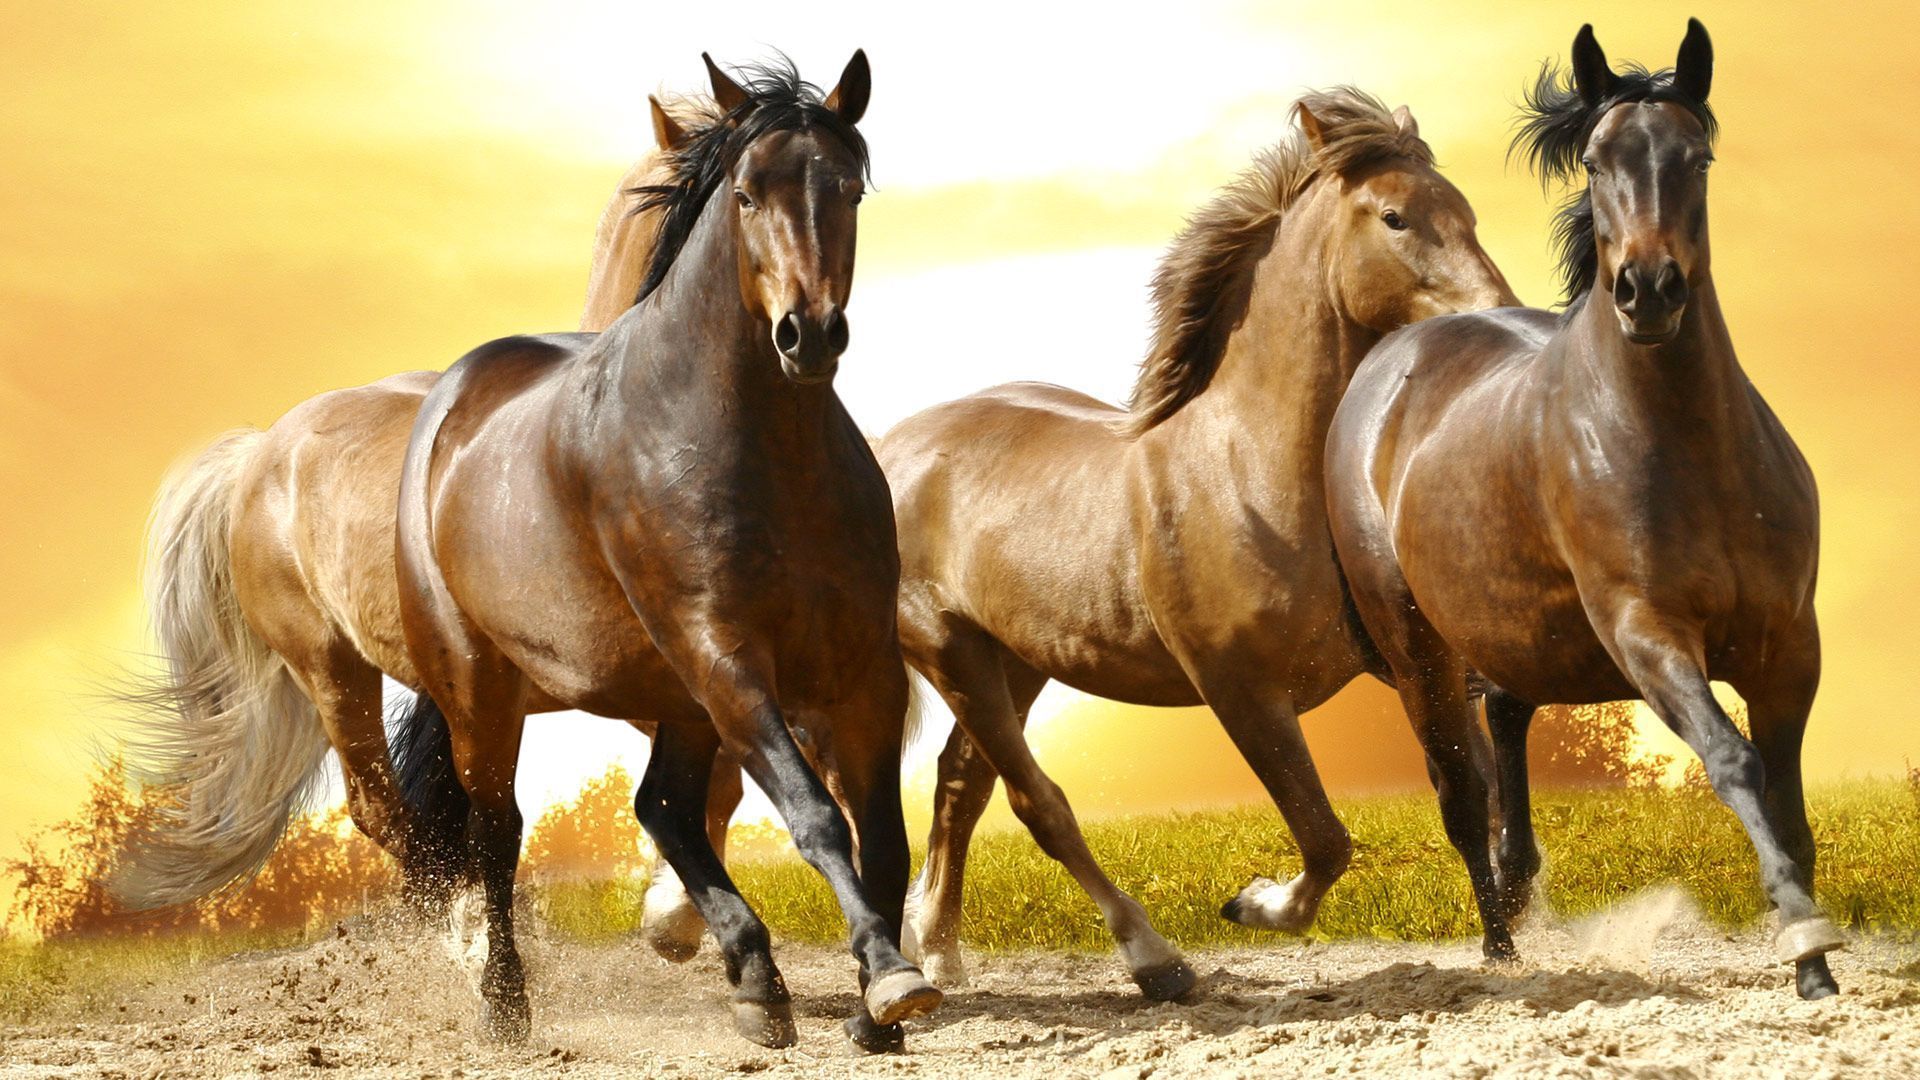 Beautiful wild horses wallpapers – Free full hd wallpapers for ...